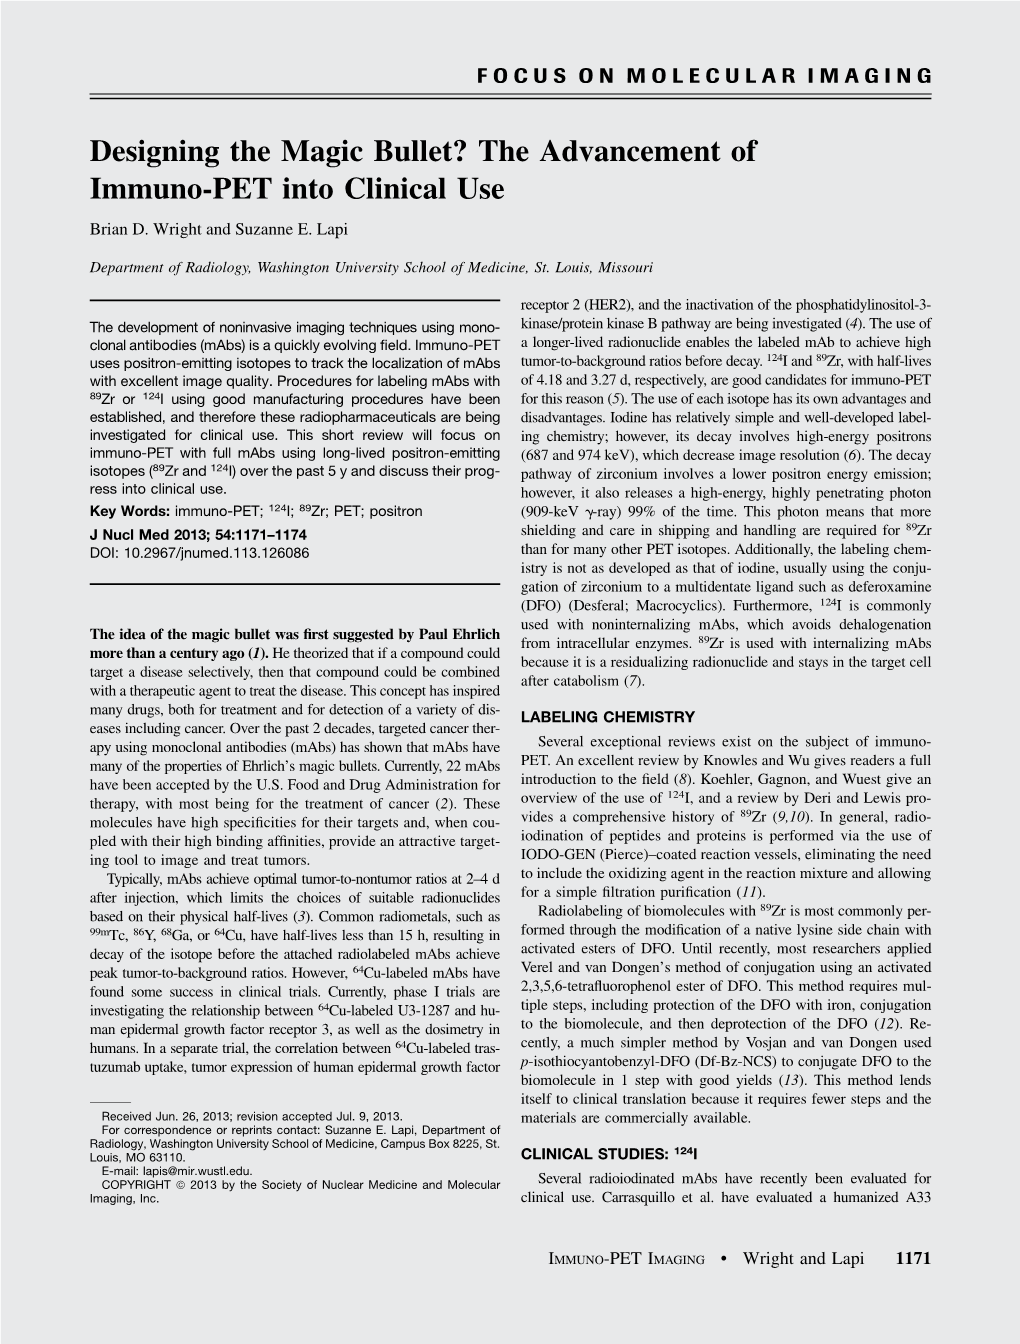 The Advancement of Immuno-PET Into Clinical Use Brian D